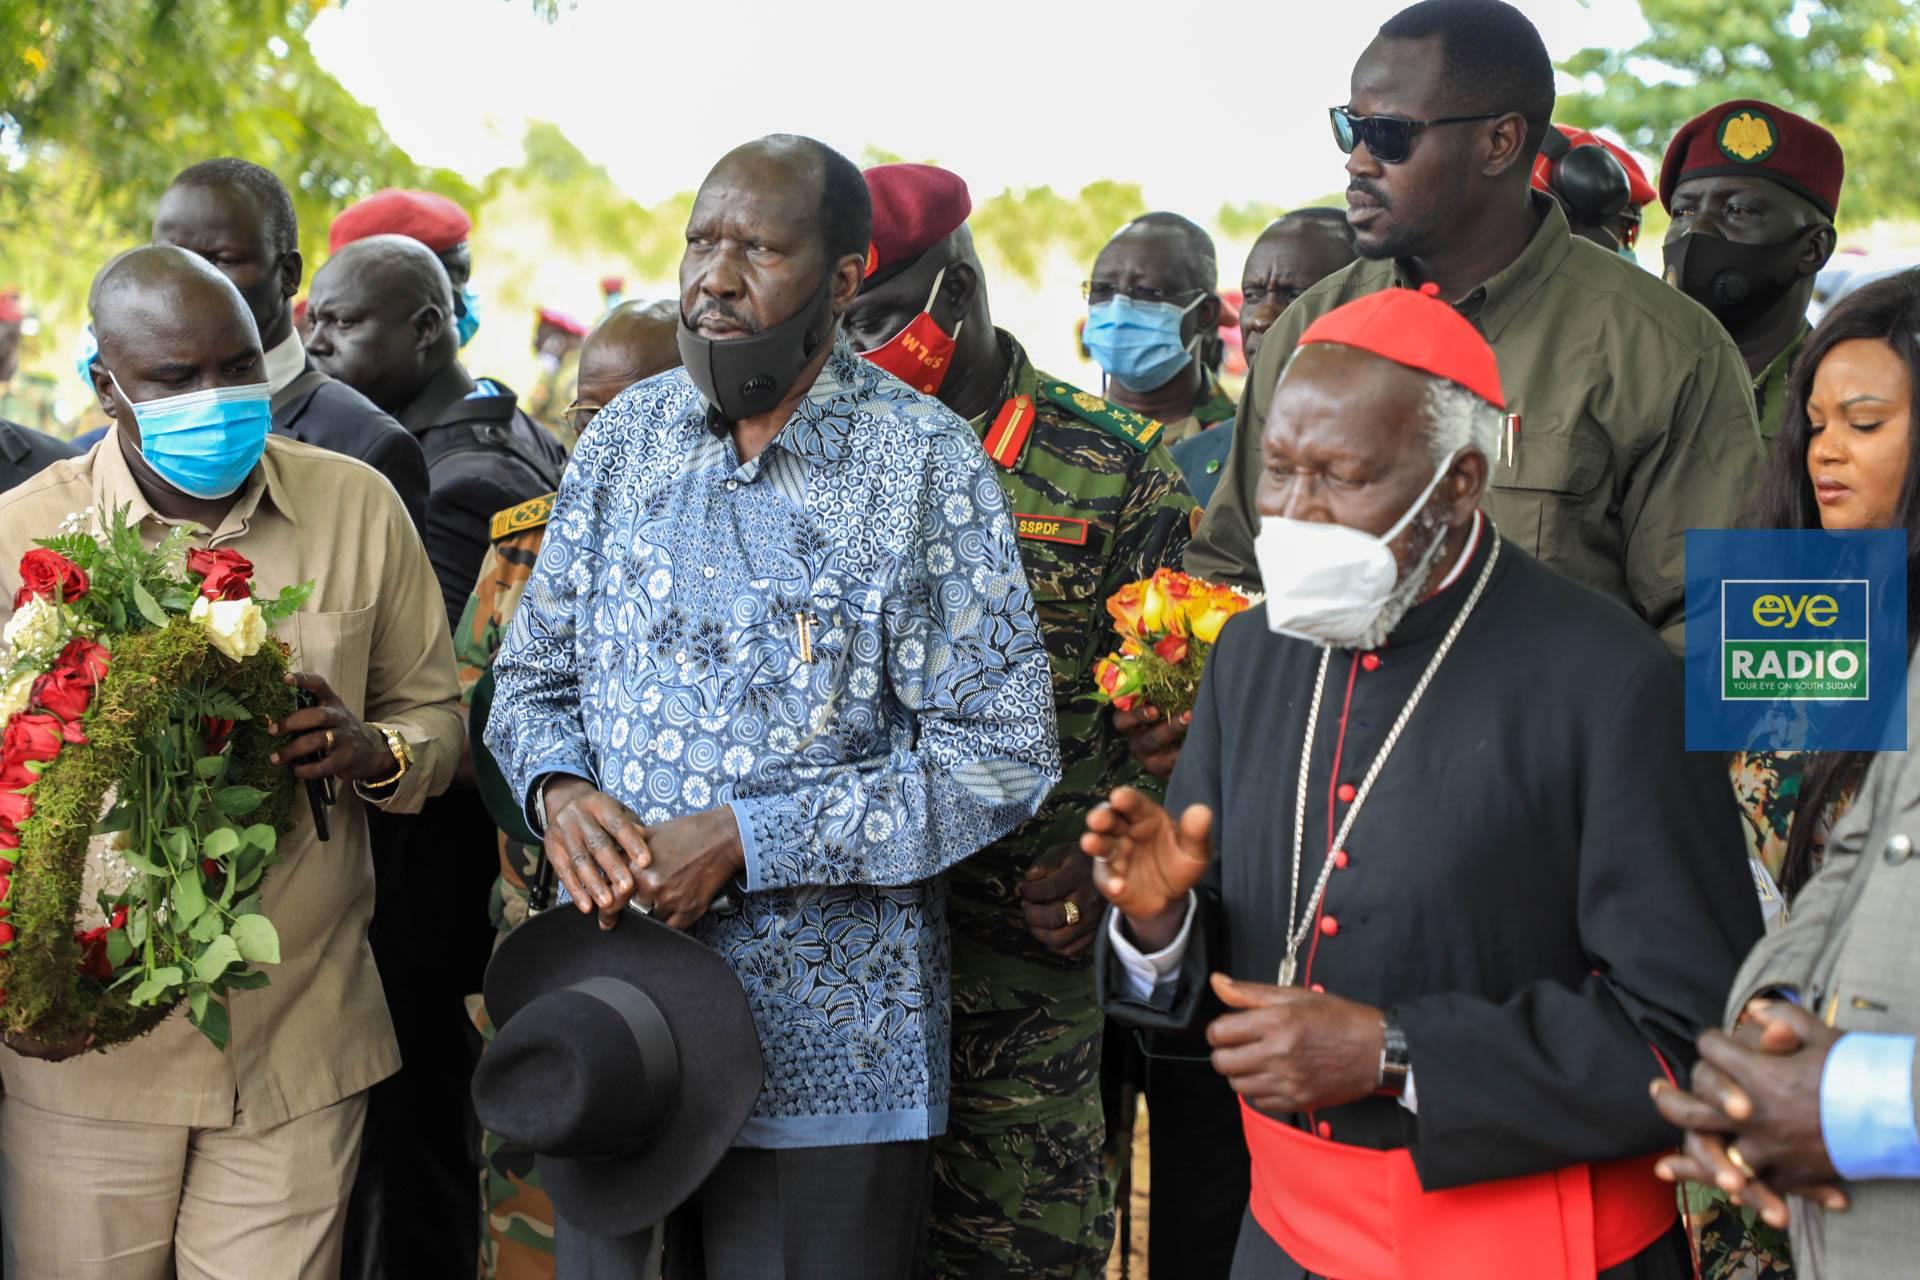 President Kiir appeals to the Madi community to return home